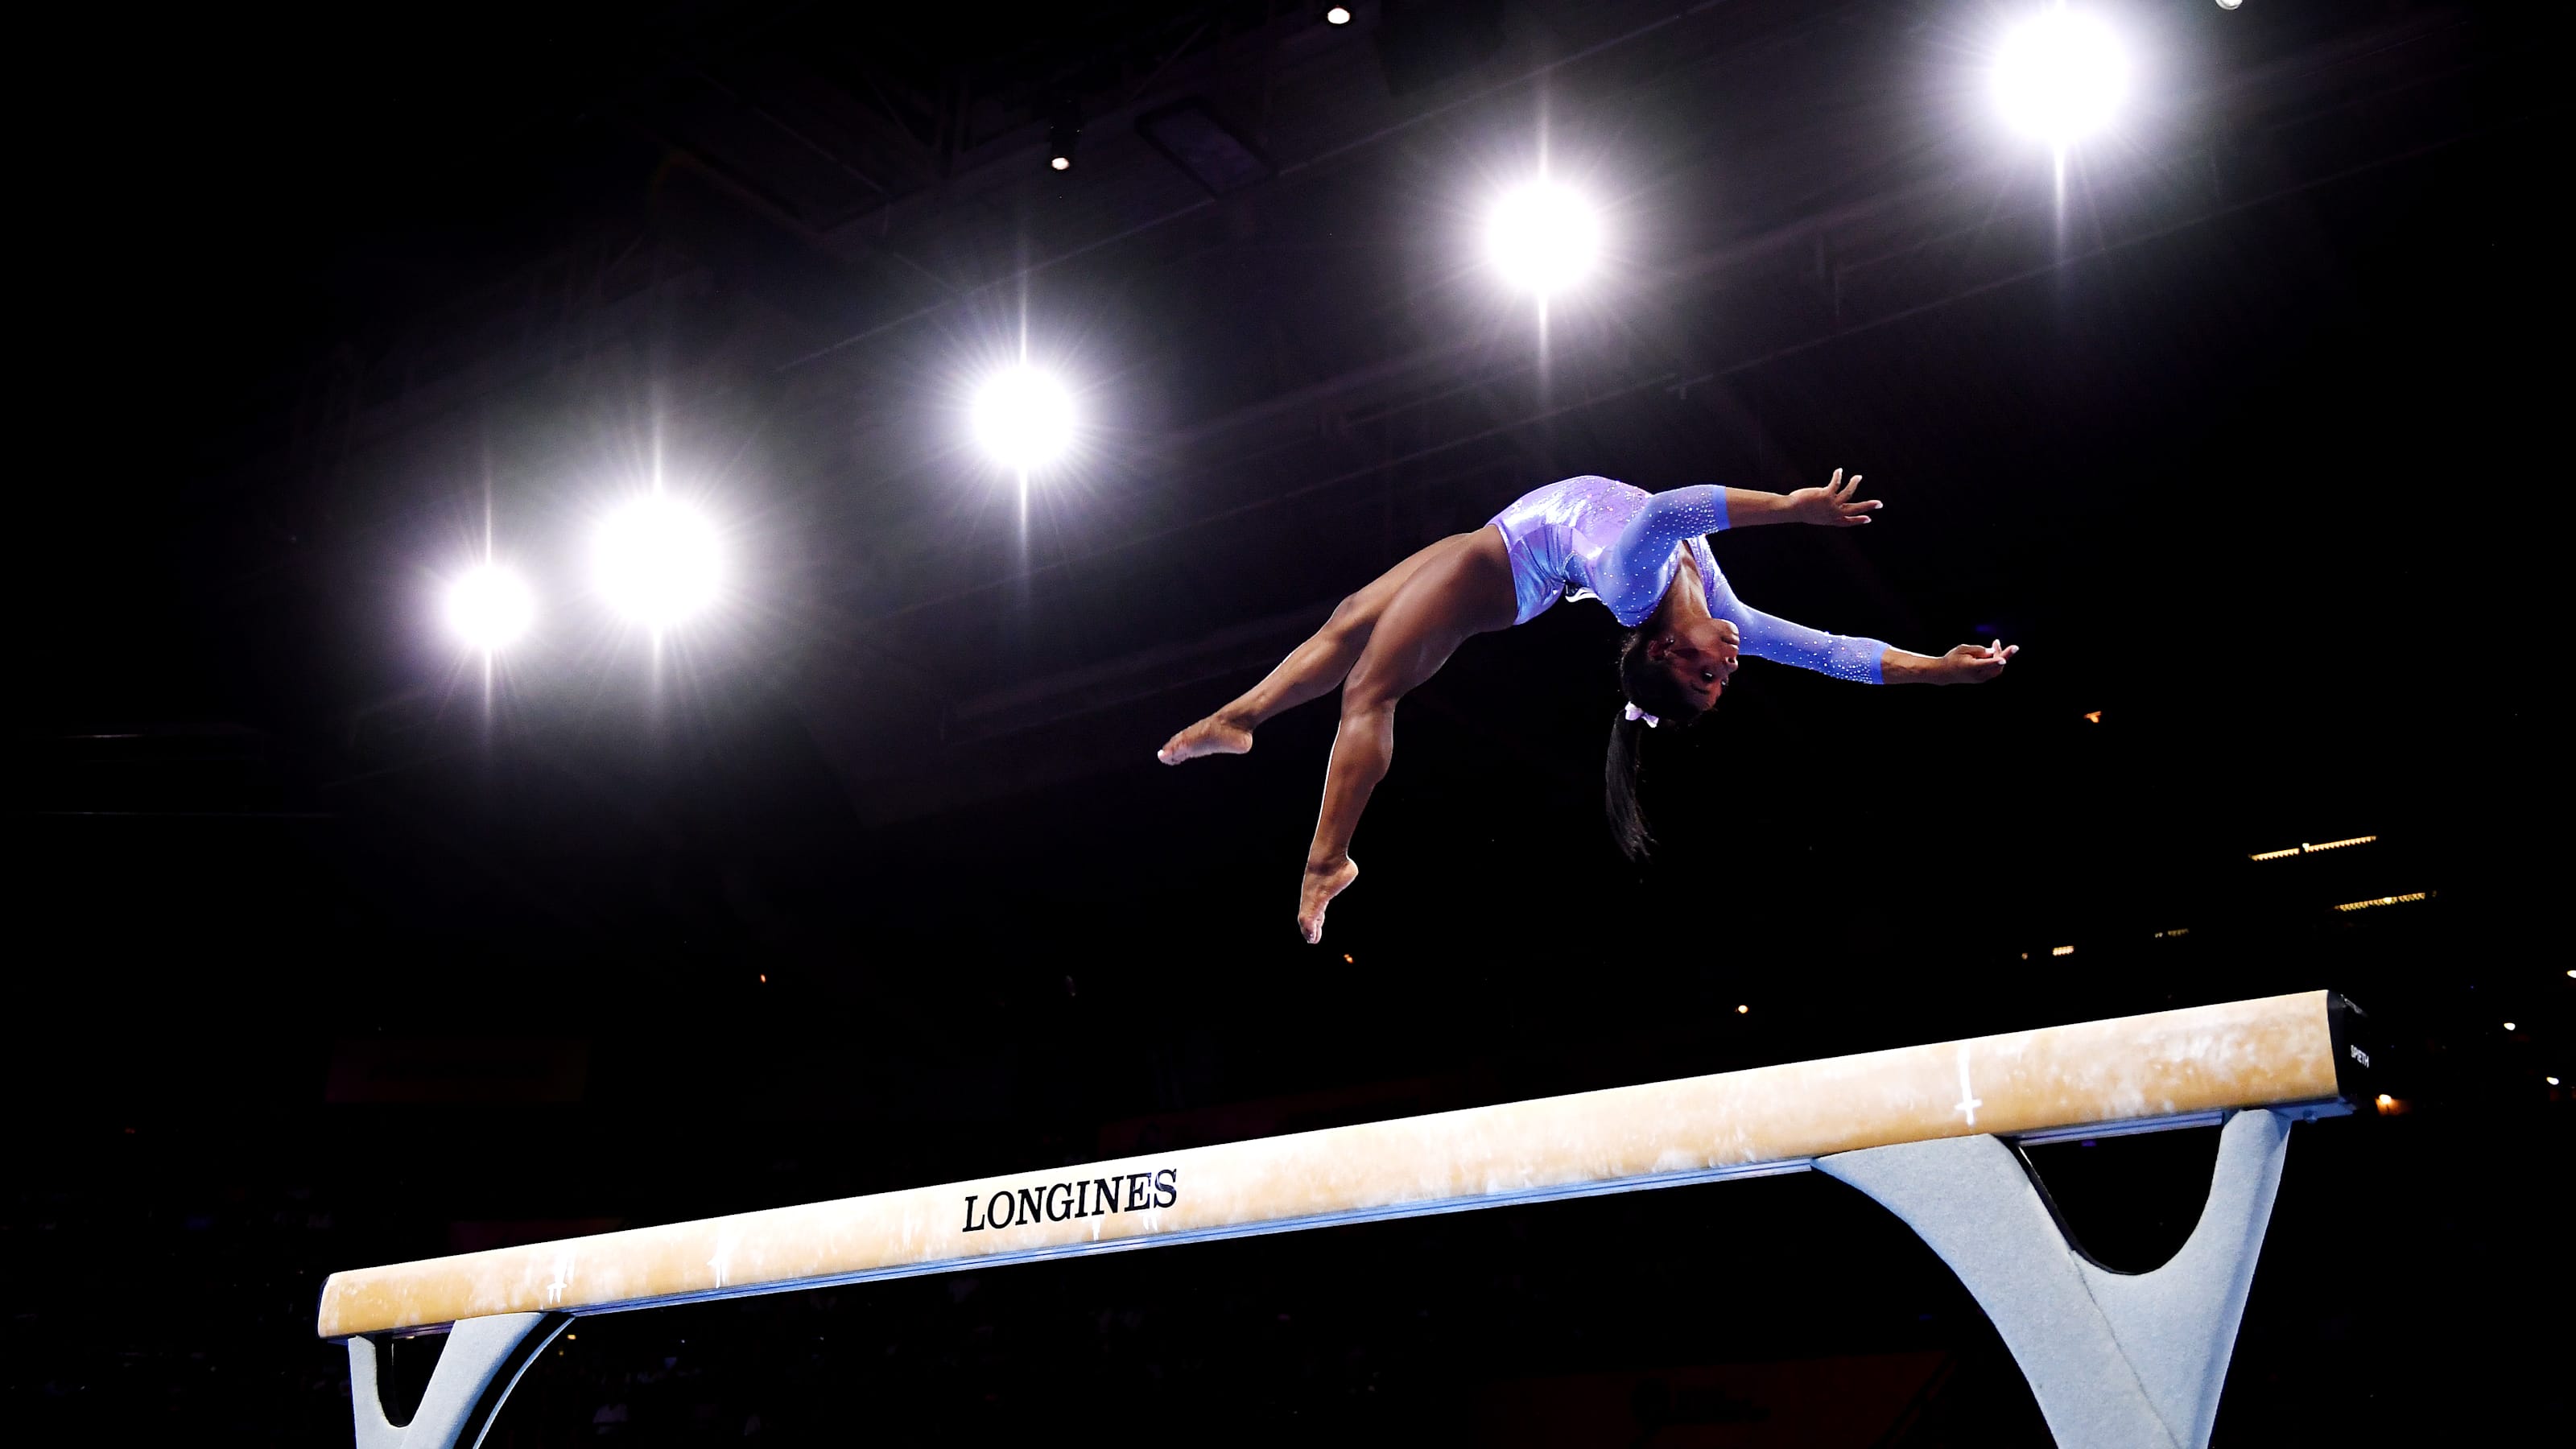 Simone Biles gives fans first look at new balance beam dismount